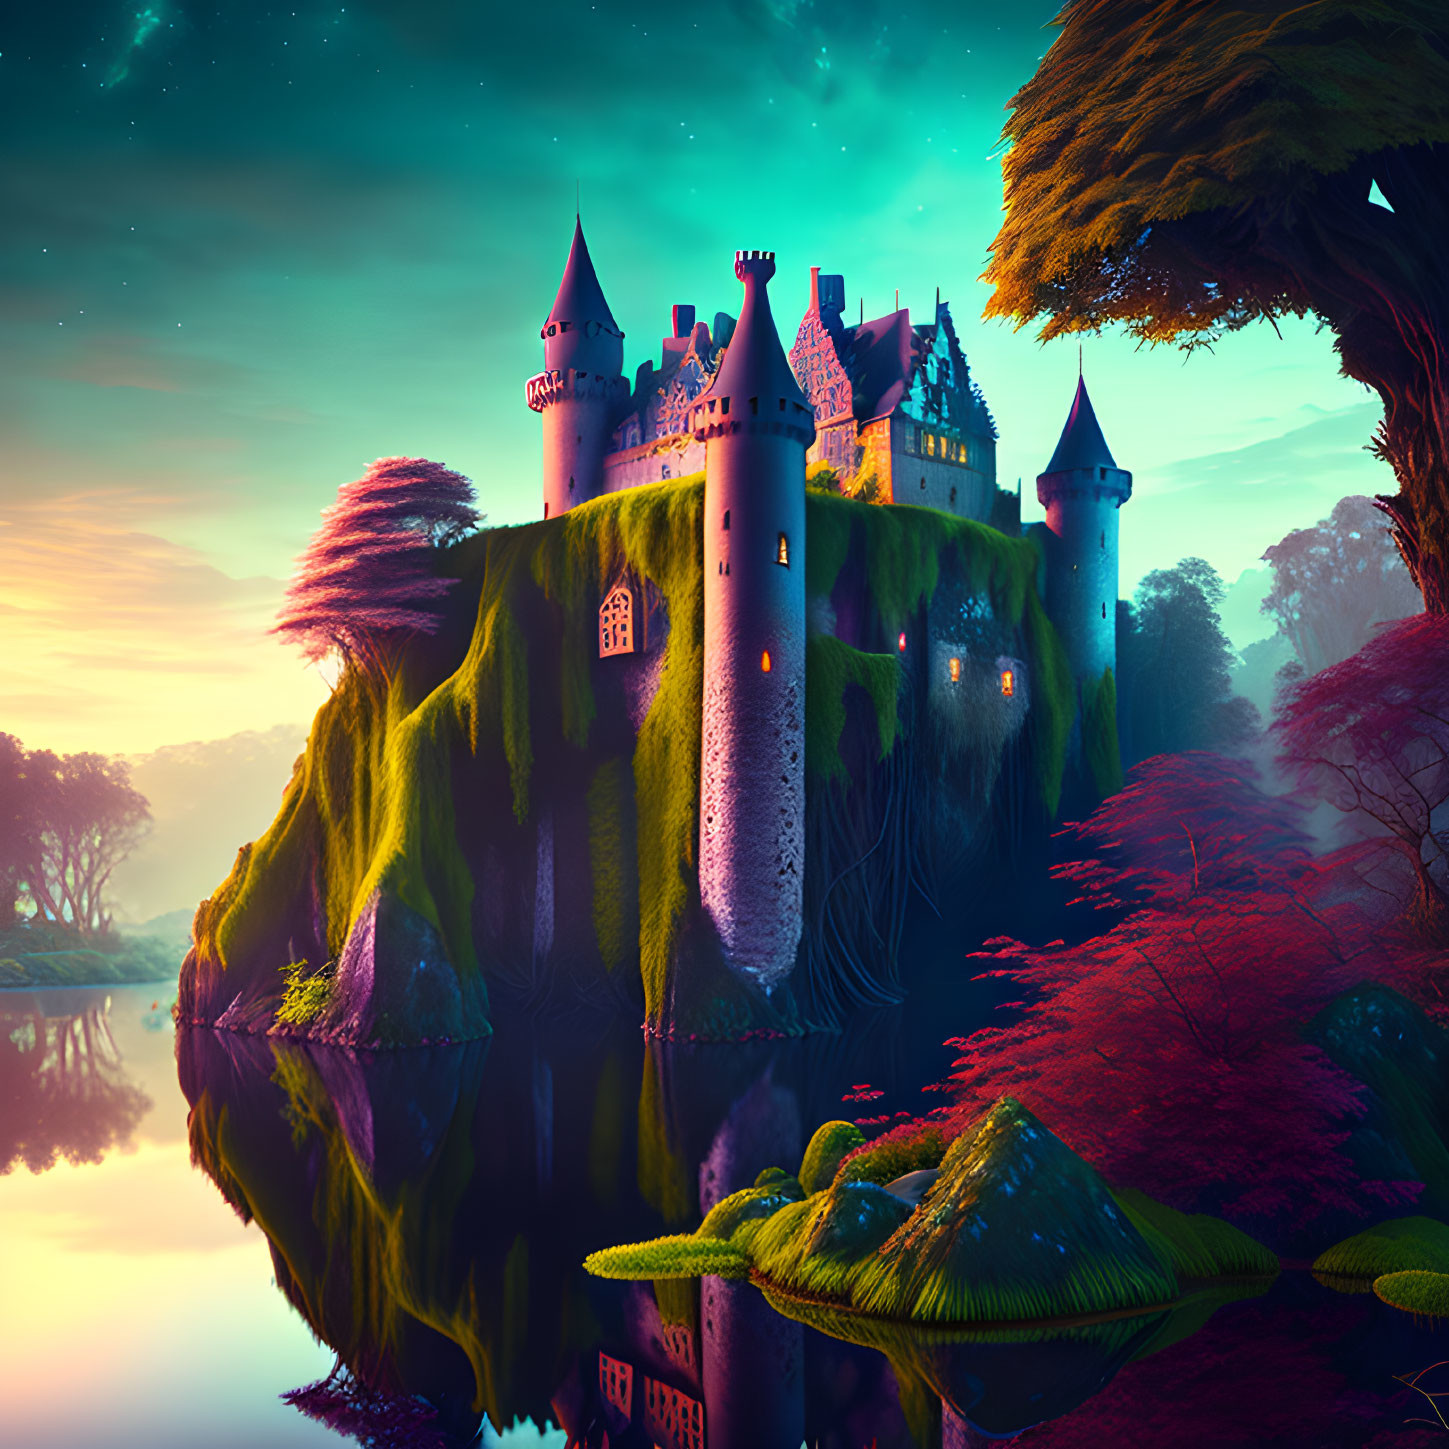 Fantastical castle on cliff reflected in calm waters at twilight